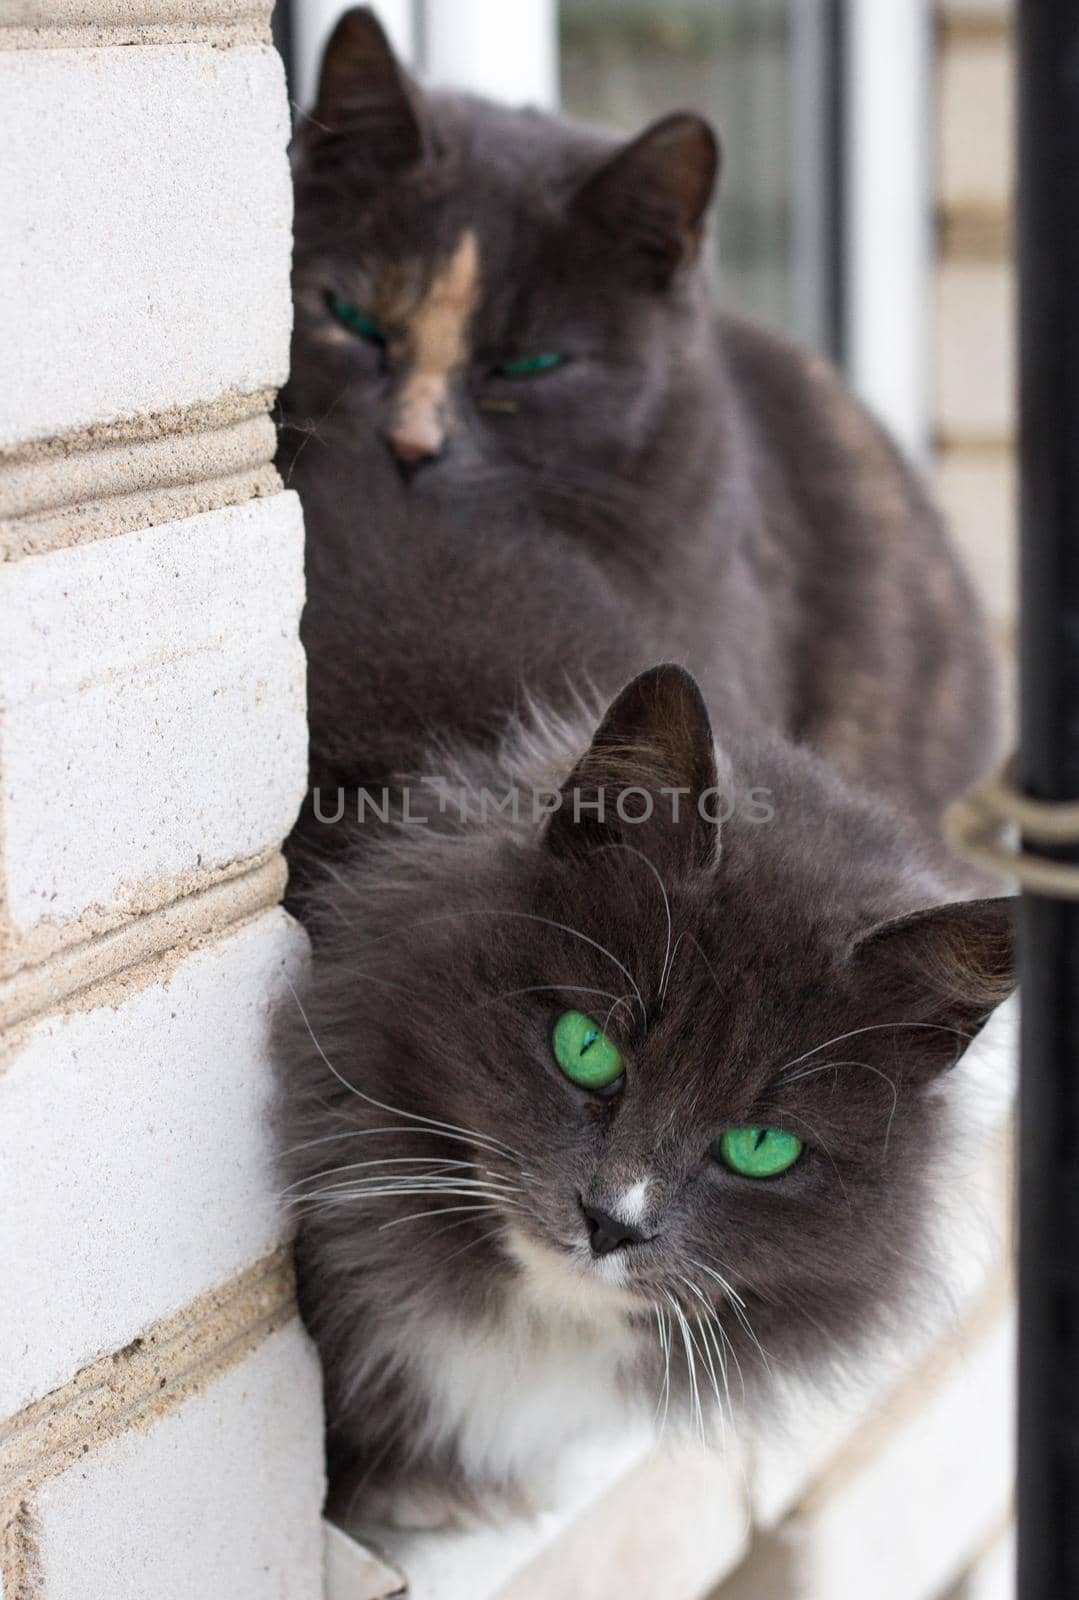 Close up of two gray furry cats with bright green eyes on window by VeraVerano